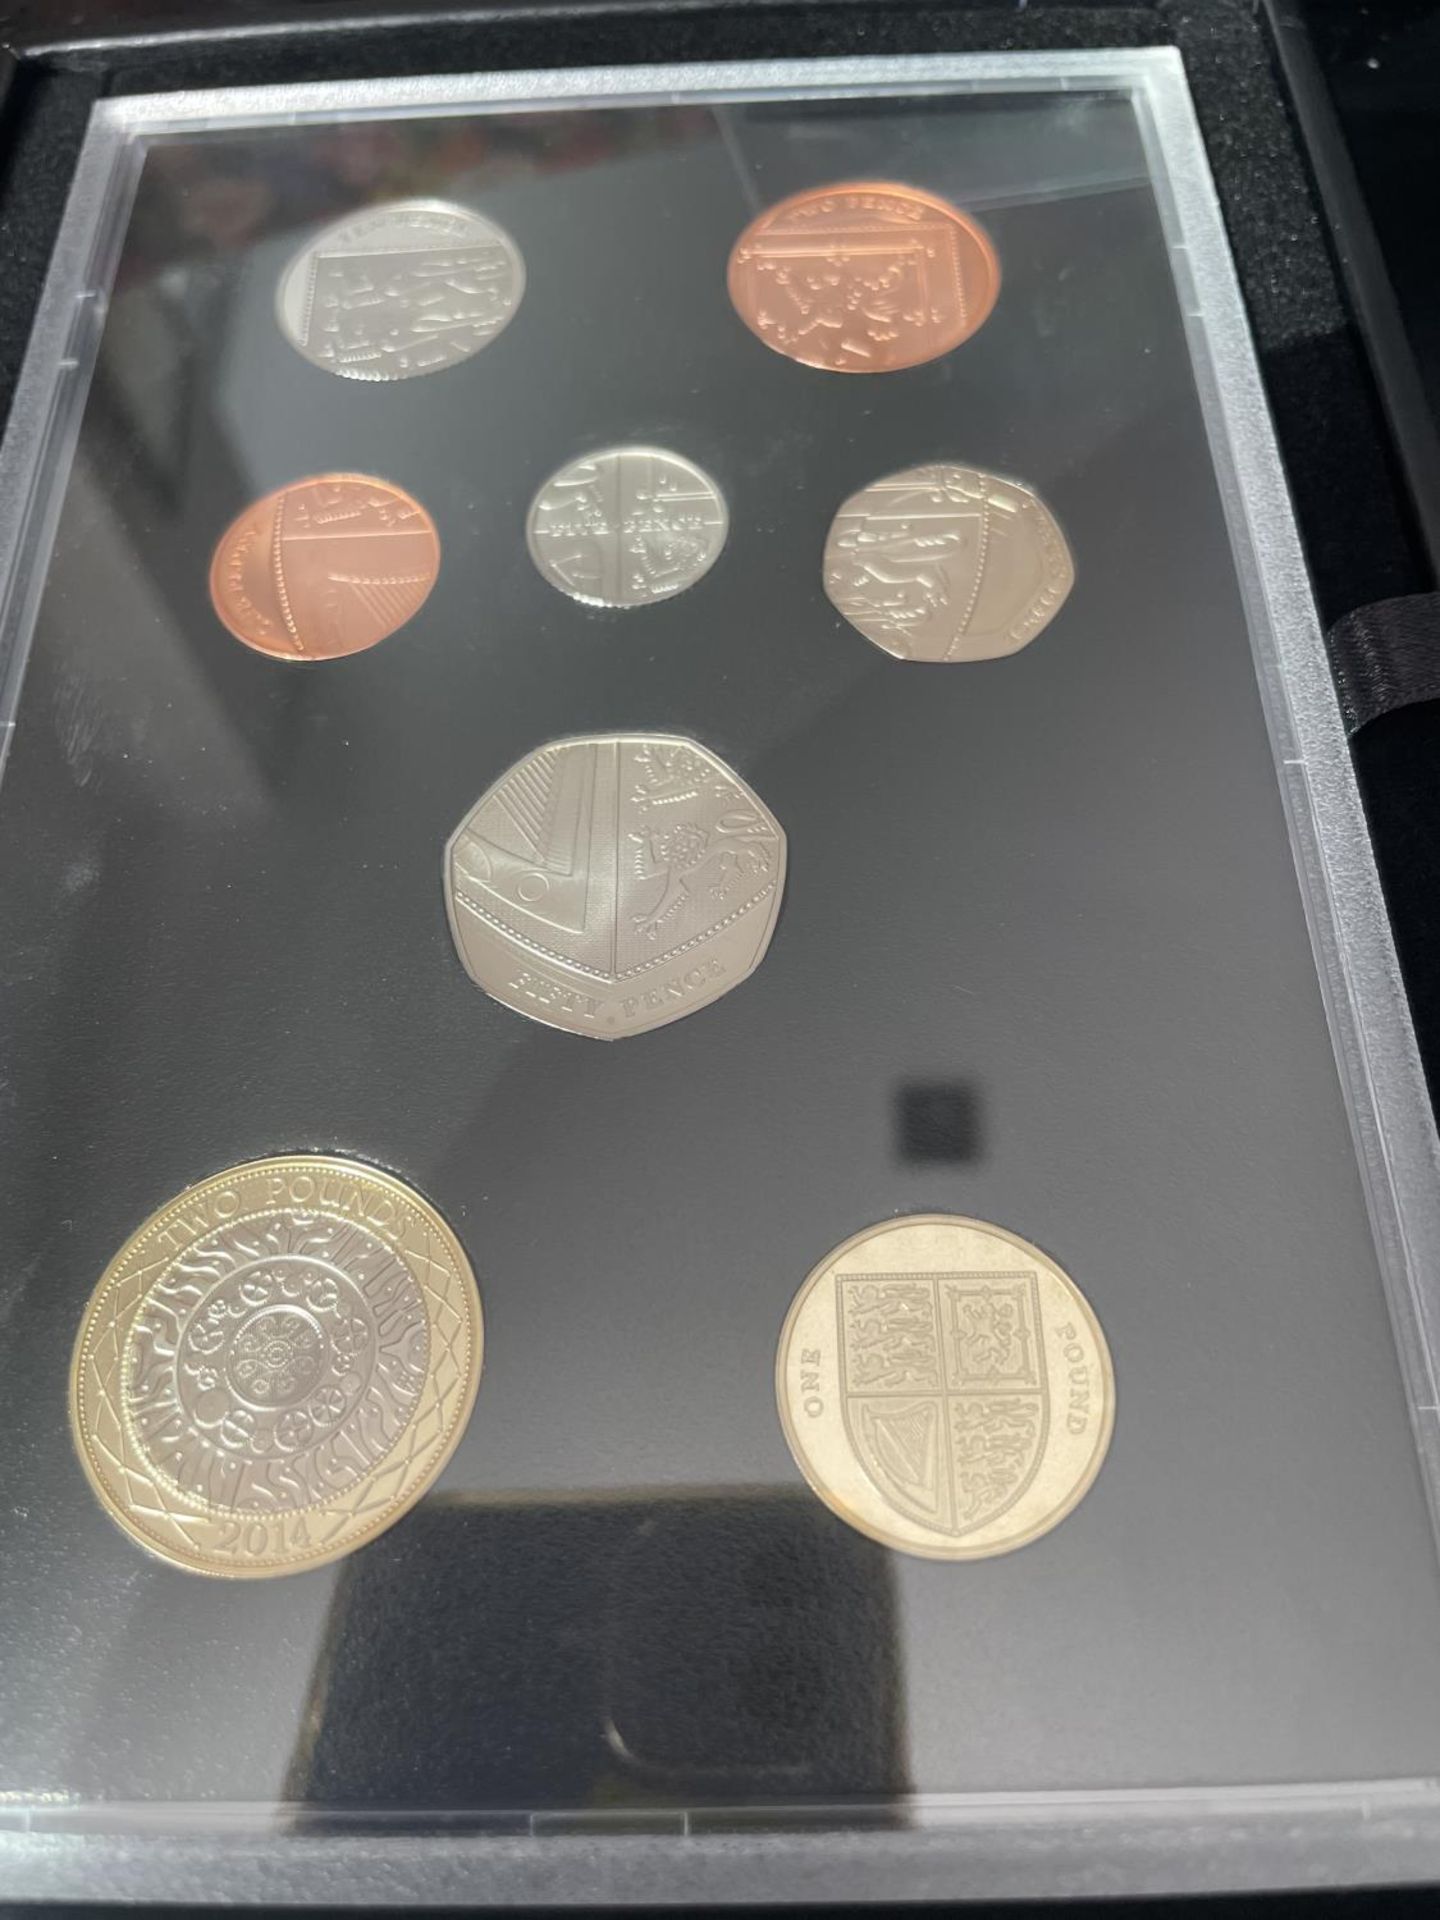 THE 2014 UK PROOF COIN SET, “COLLECTOR’S” EDITION - Image 2 of 6